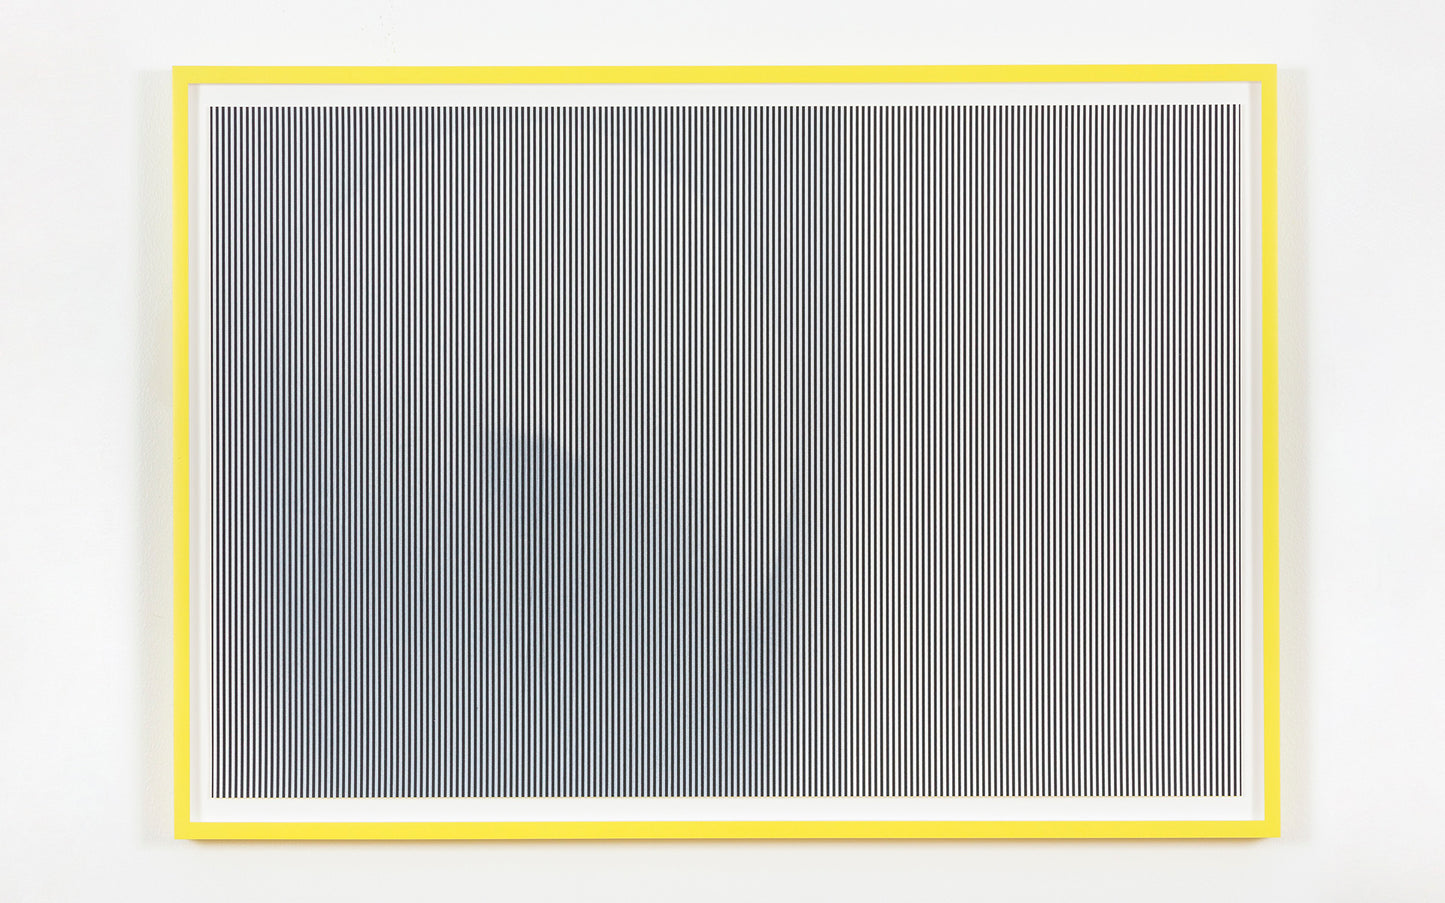 The Sun Does Not Move, Position 1–12, 2019 by R. H. Quaytman